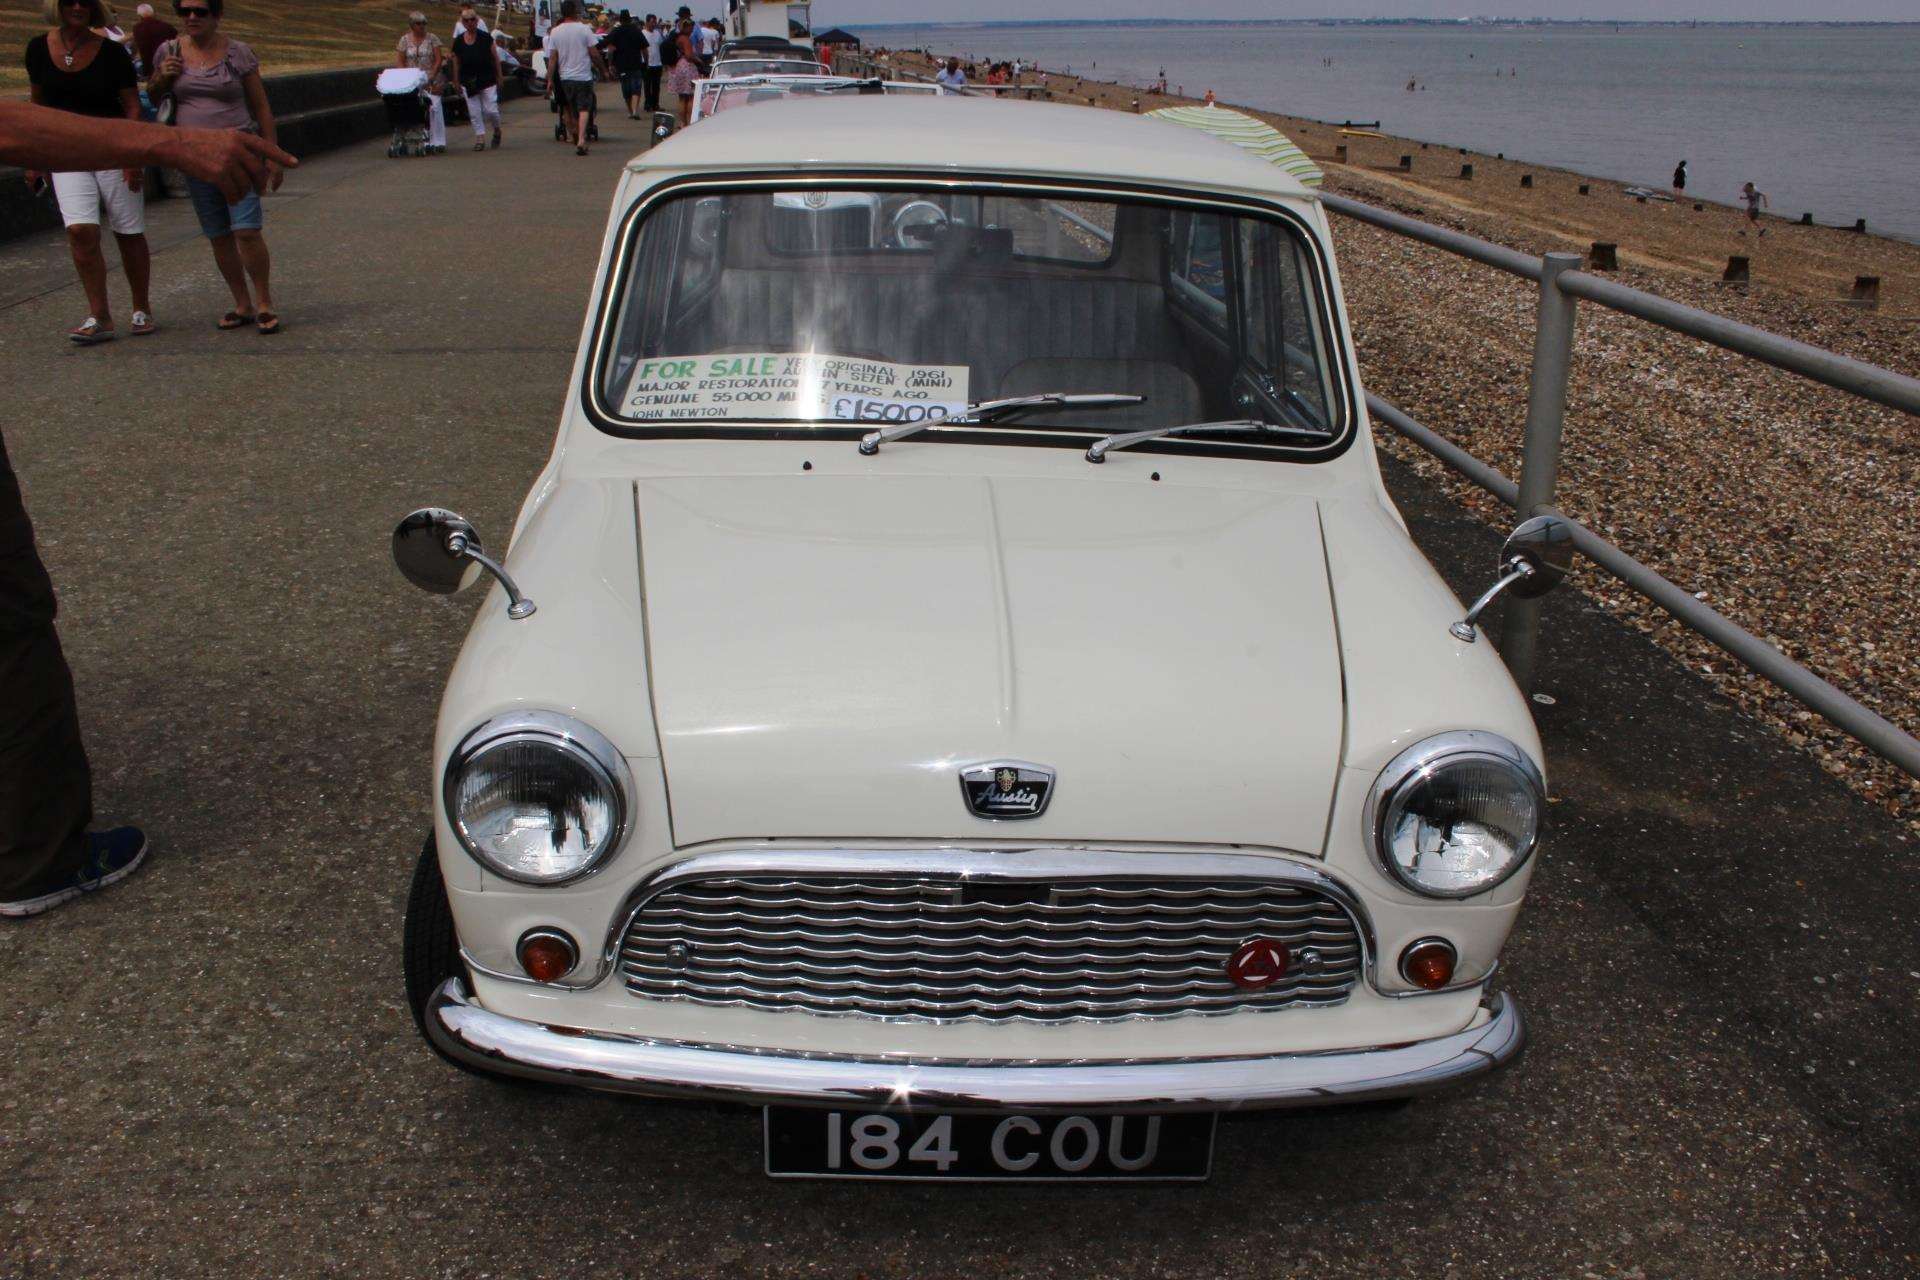 An original 1961 Mini for sale for £15,000 on the Sheppey seafront at Minster Leas on Sunday (3206598)